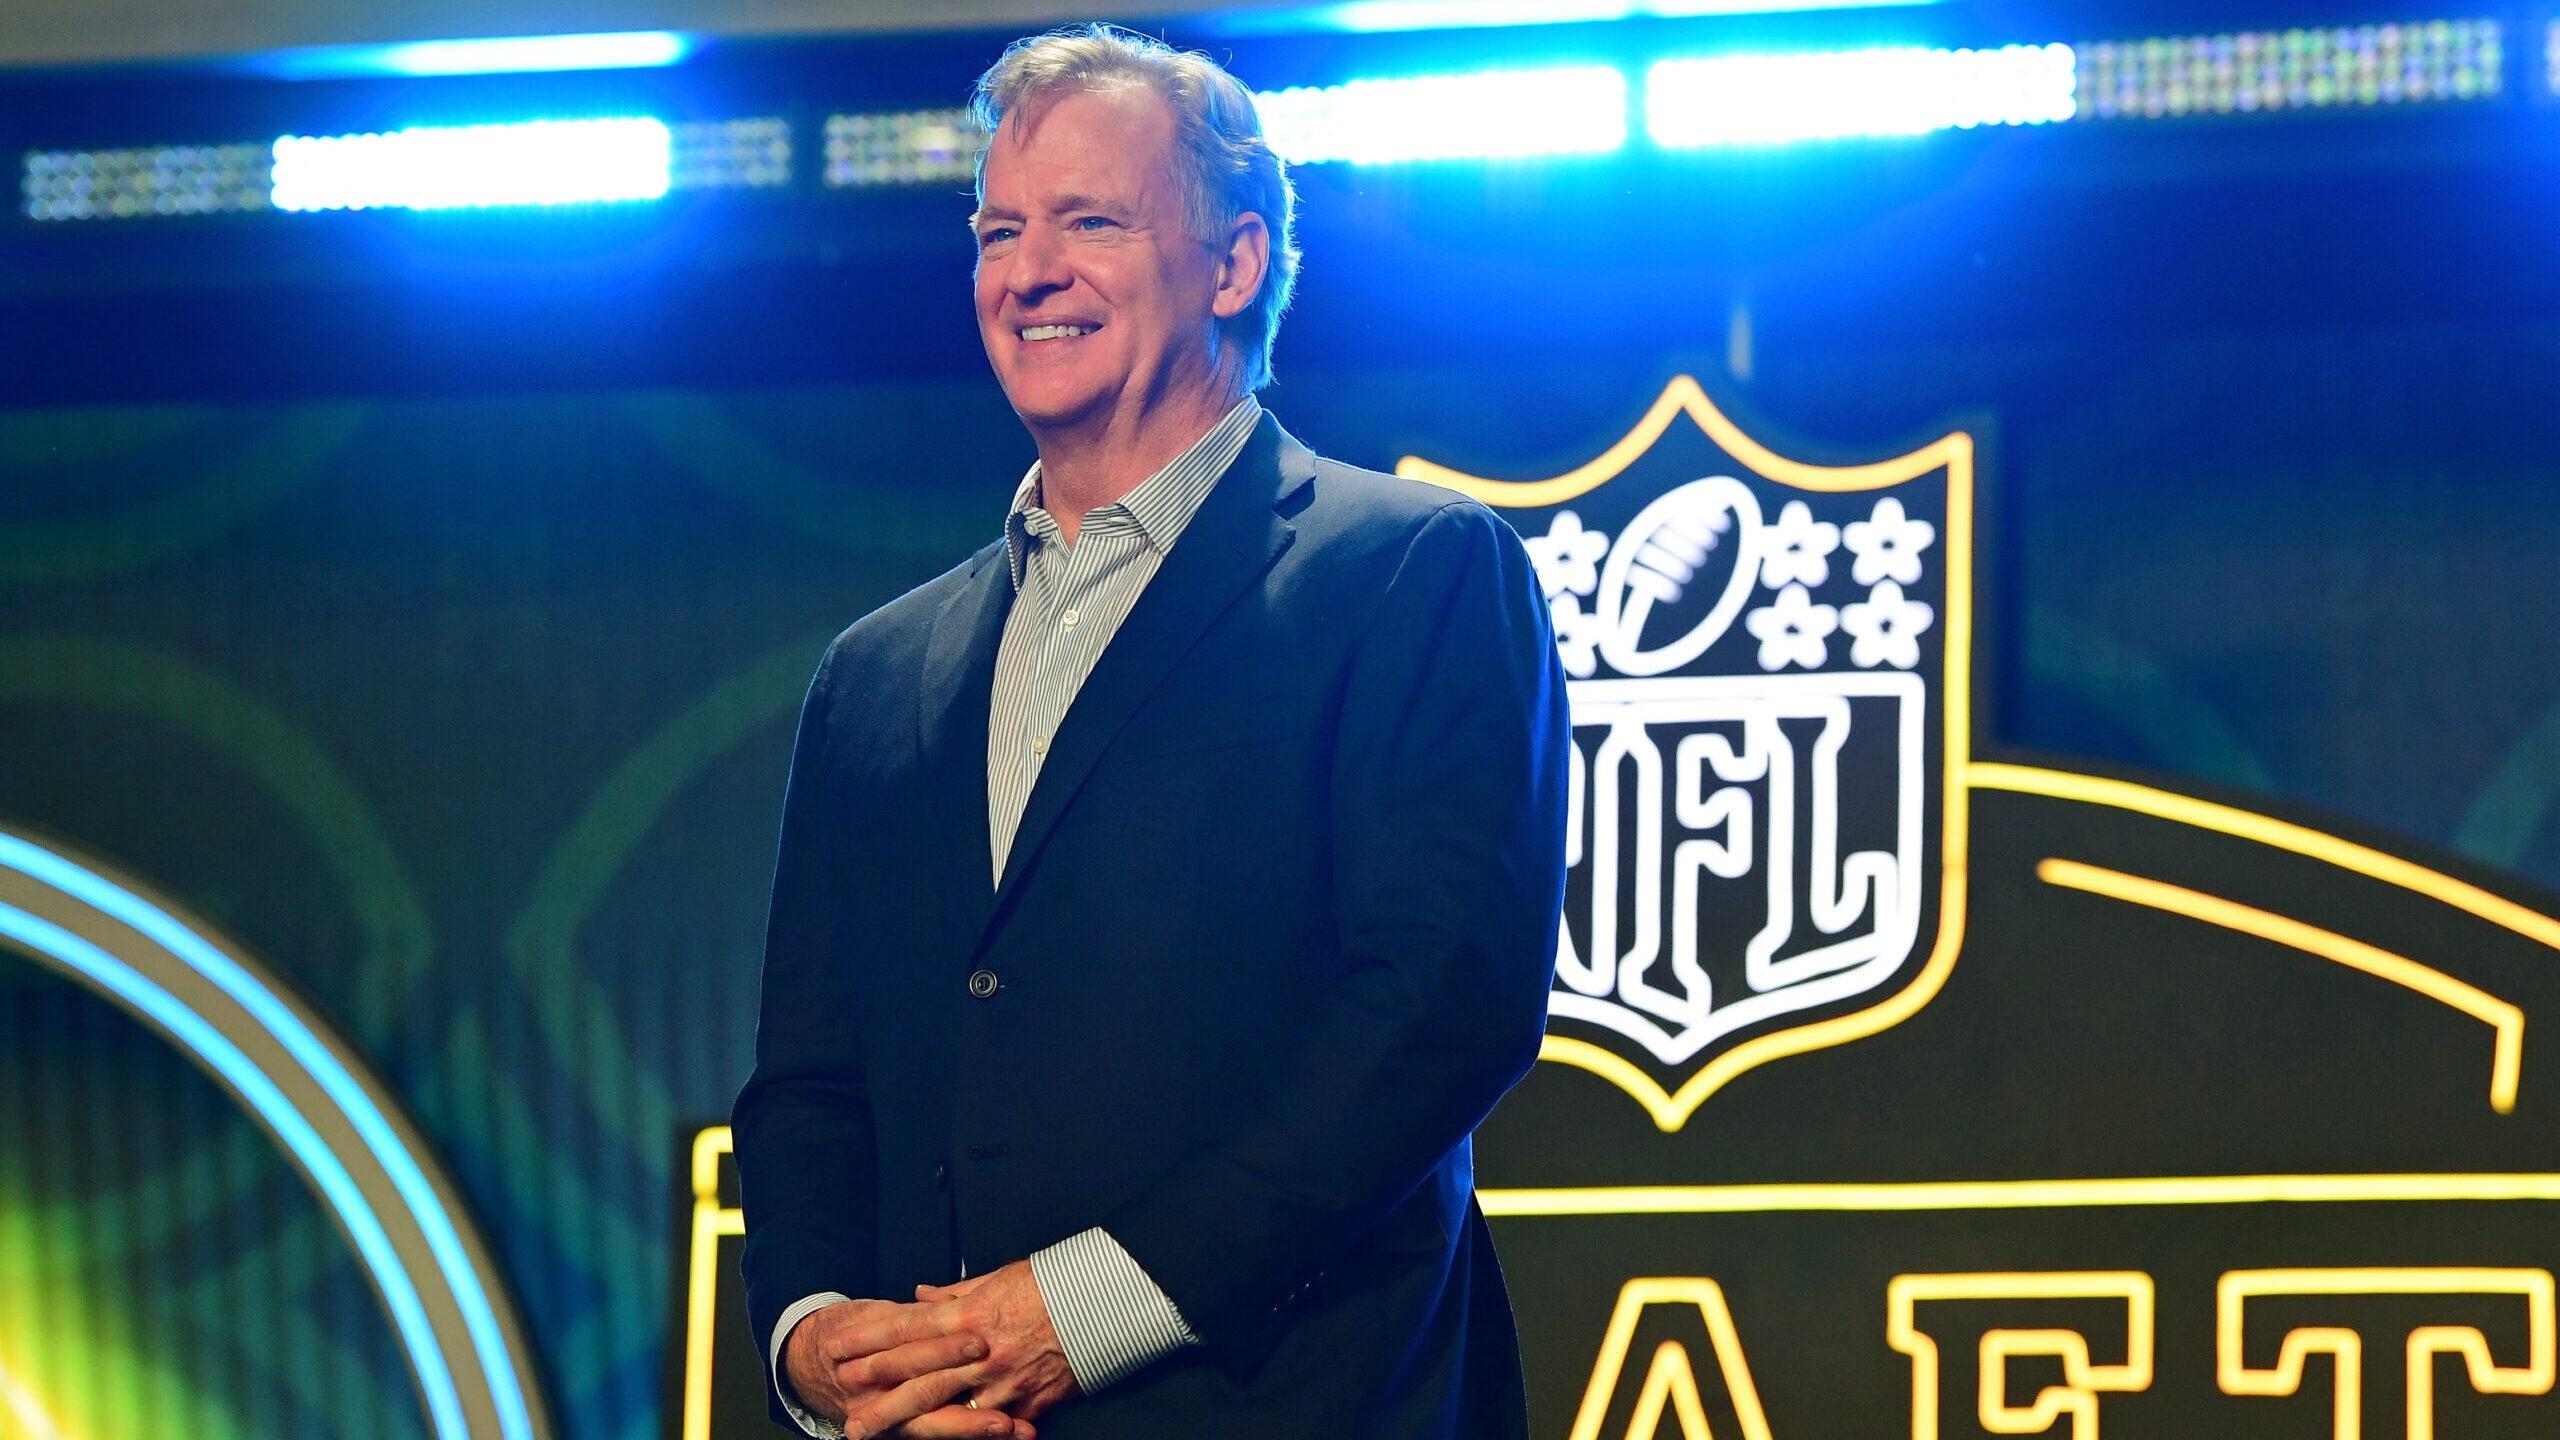 Move NFL Draft Ahead of Free Agency to Build Better Teams